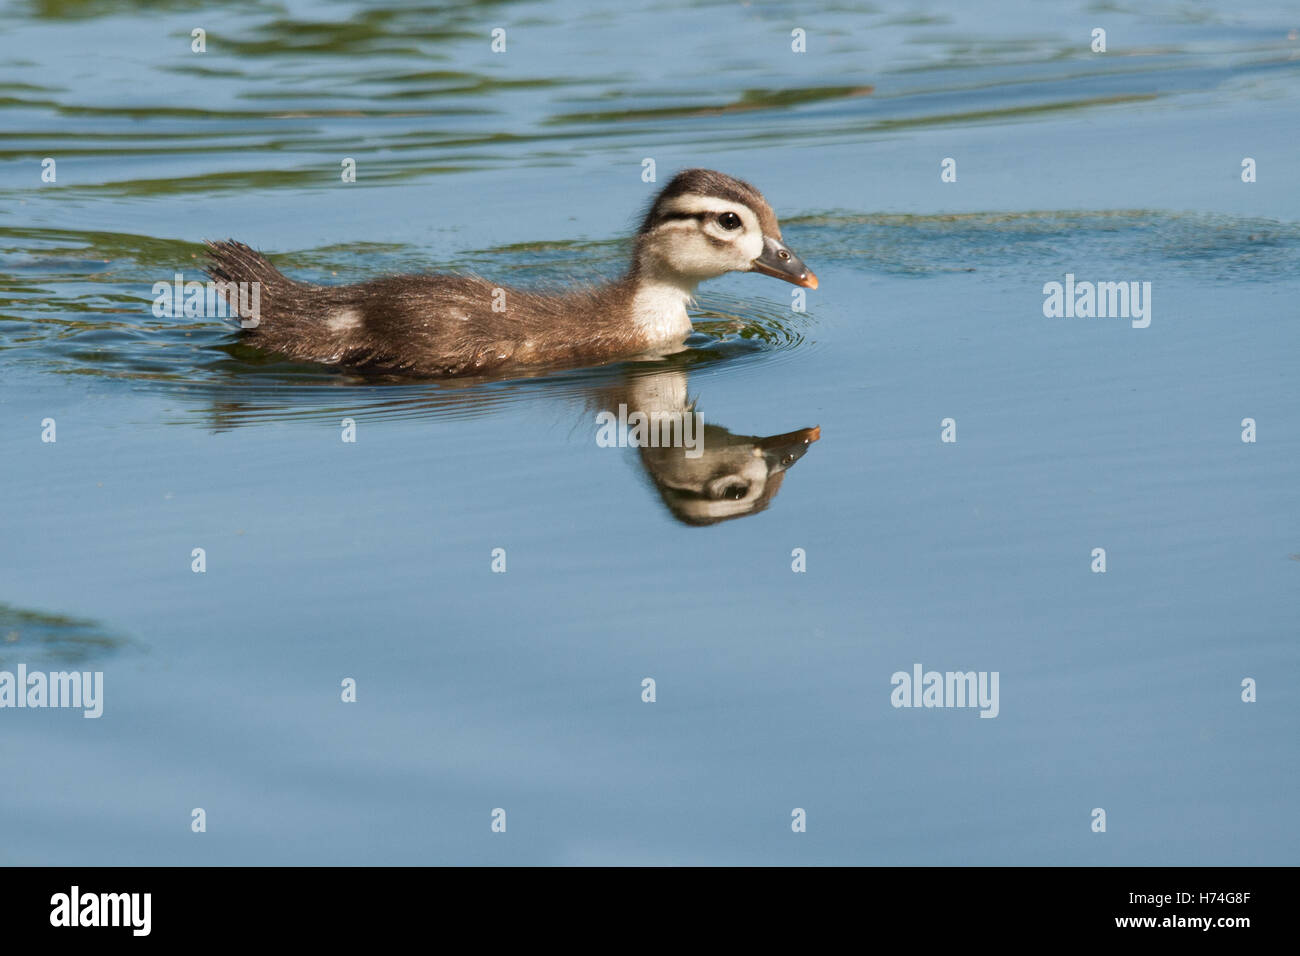 Baby duckling swimming in the water with reflection Stock Photo